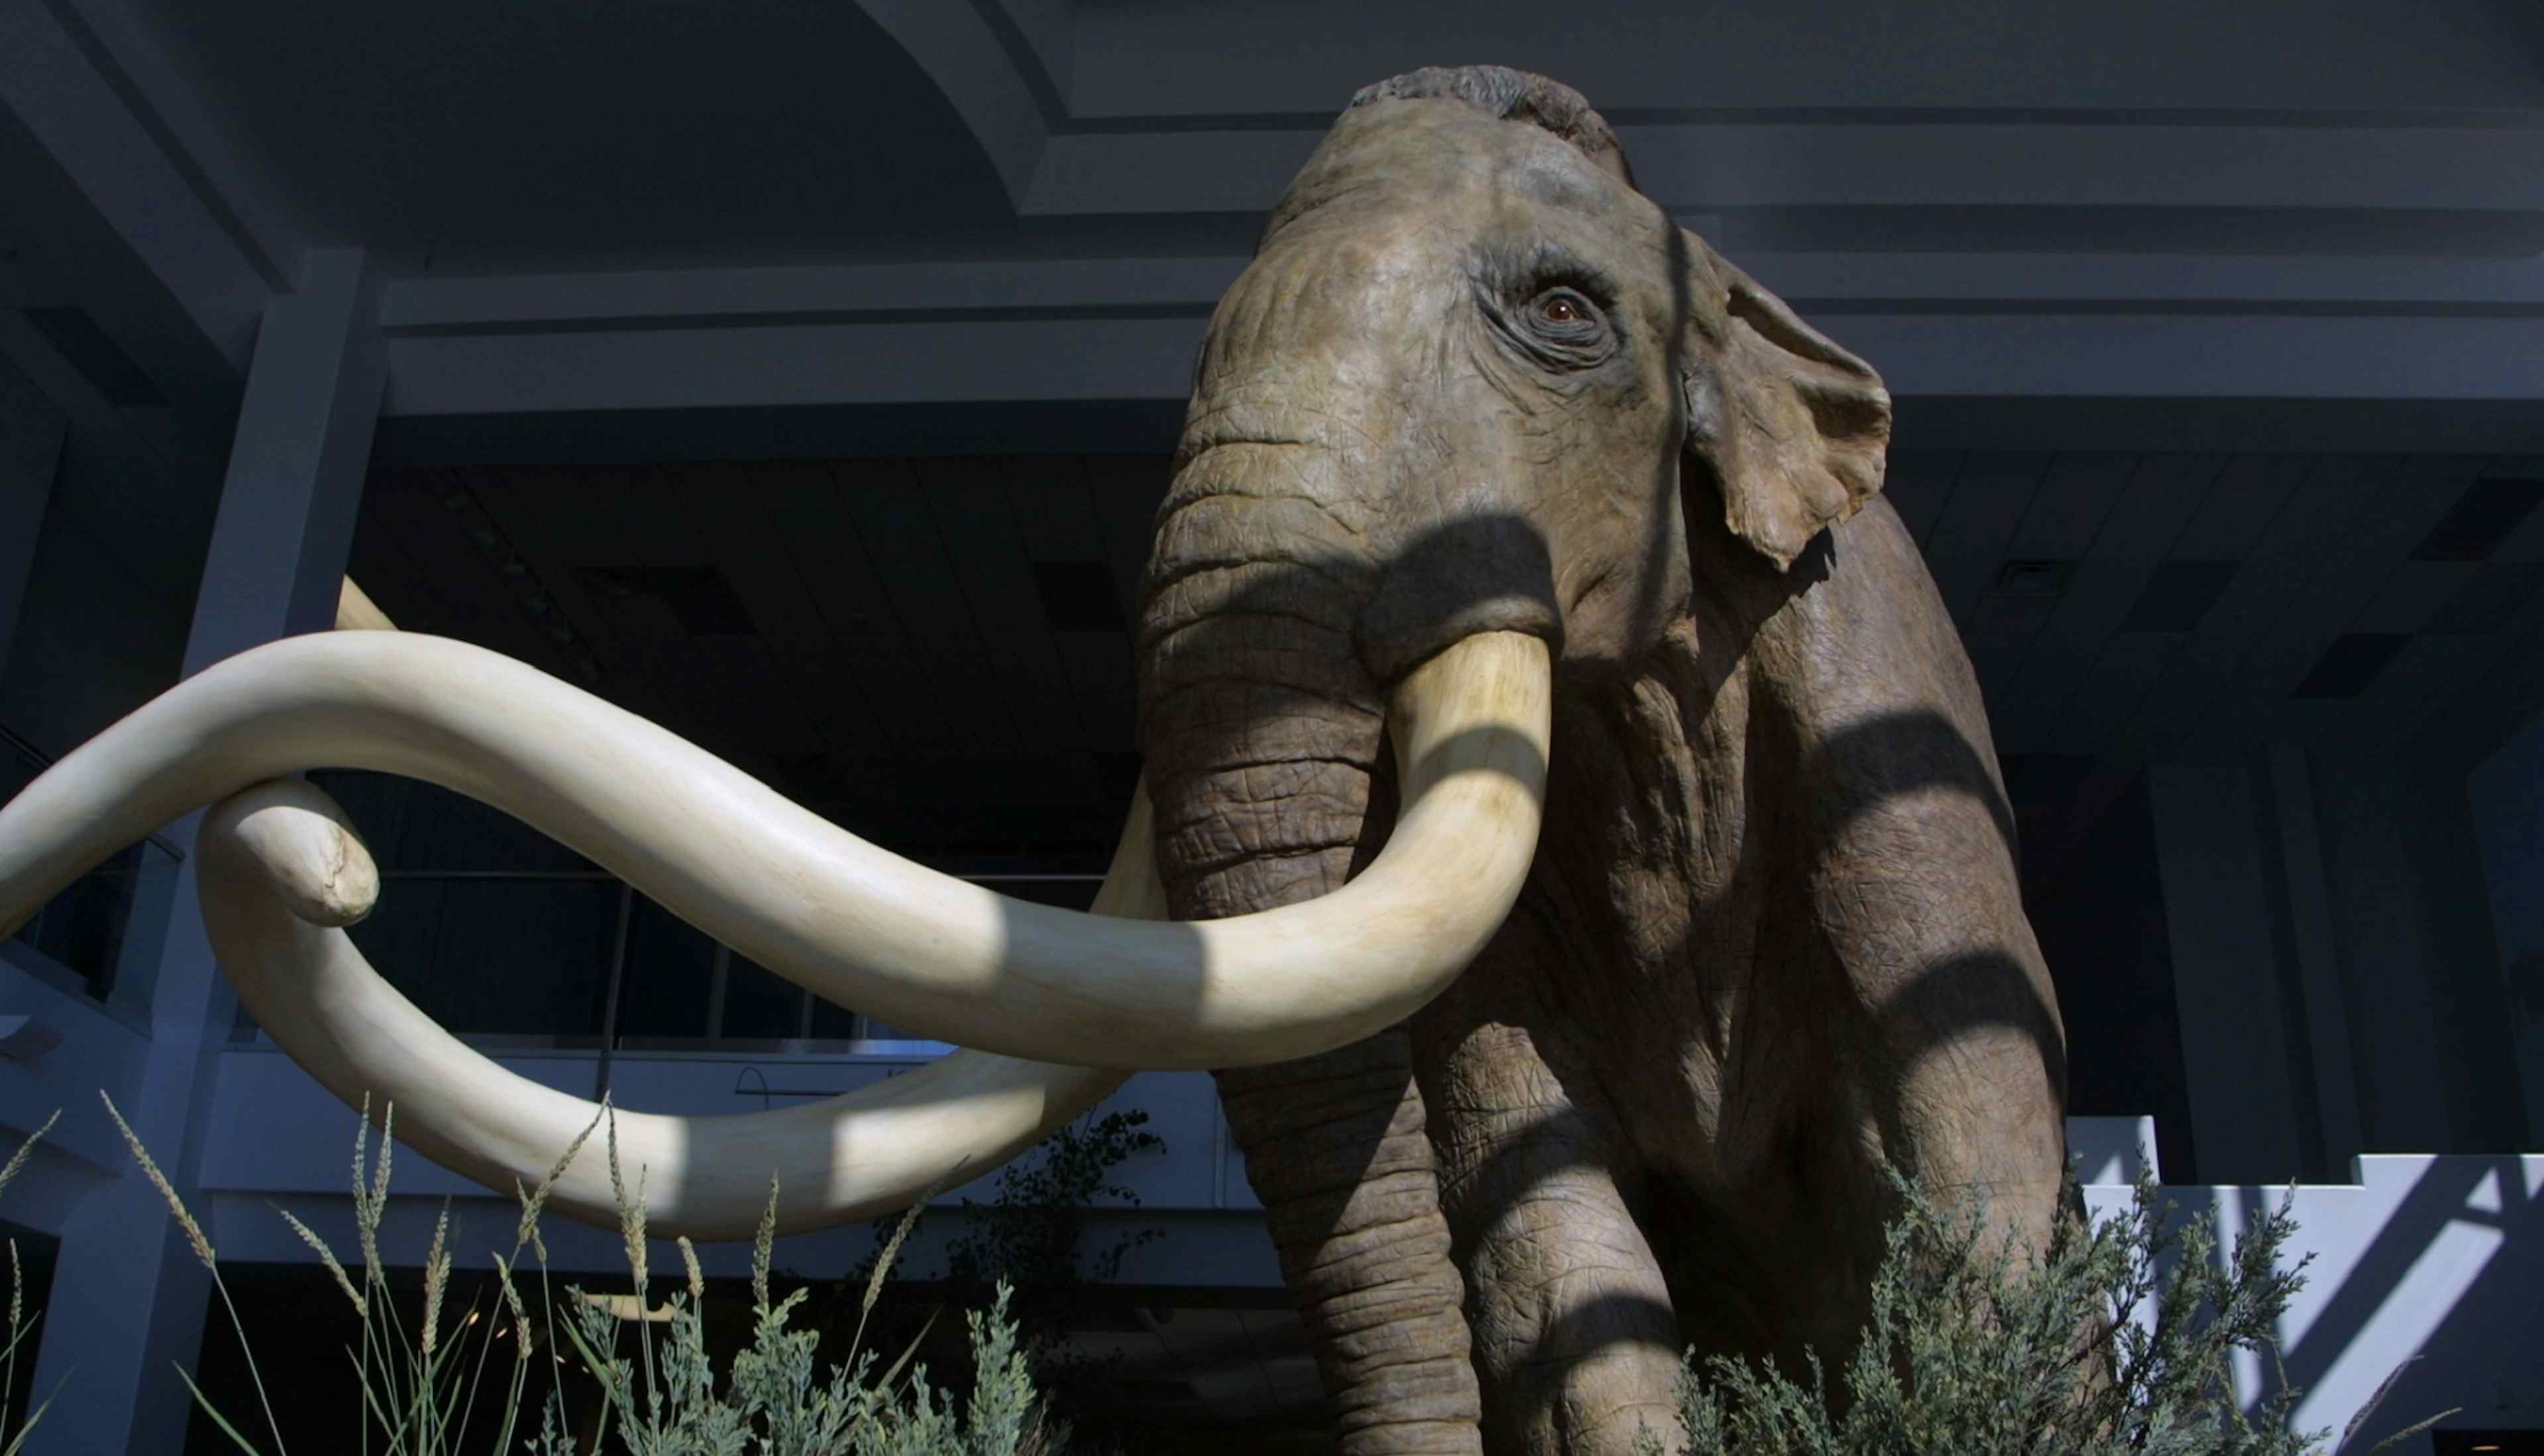 Picture of an elephant model located in Idaho Falls, part of Yellowstone Teton Territory.